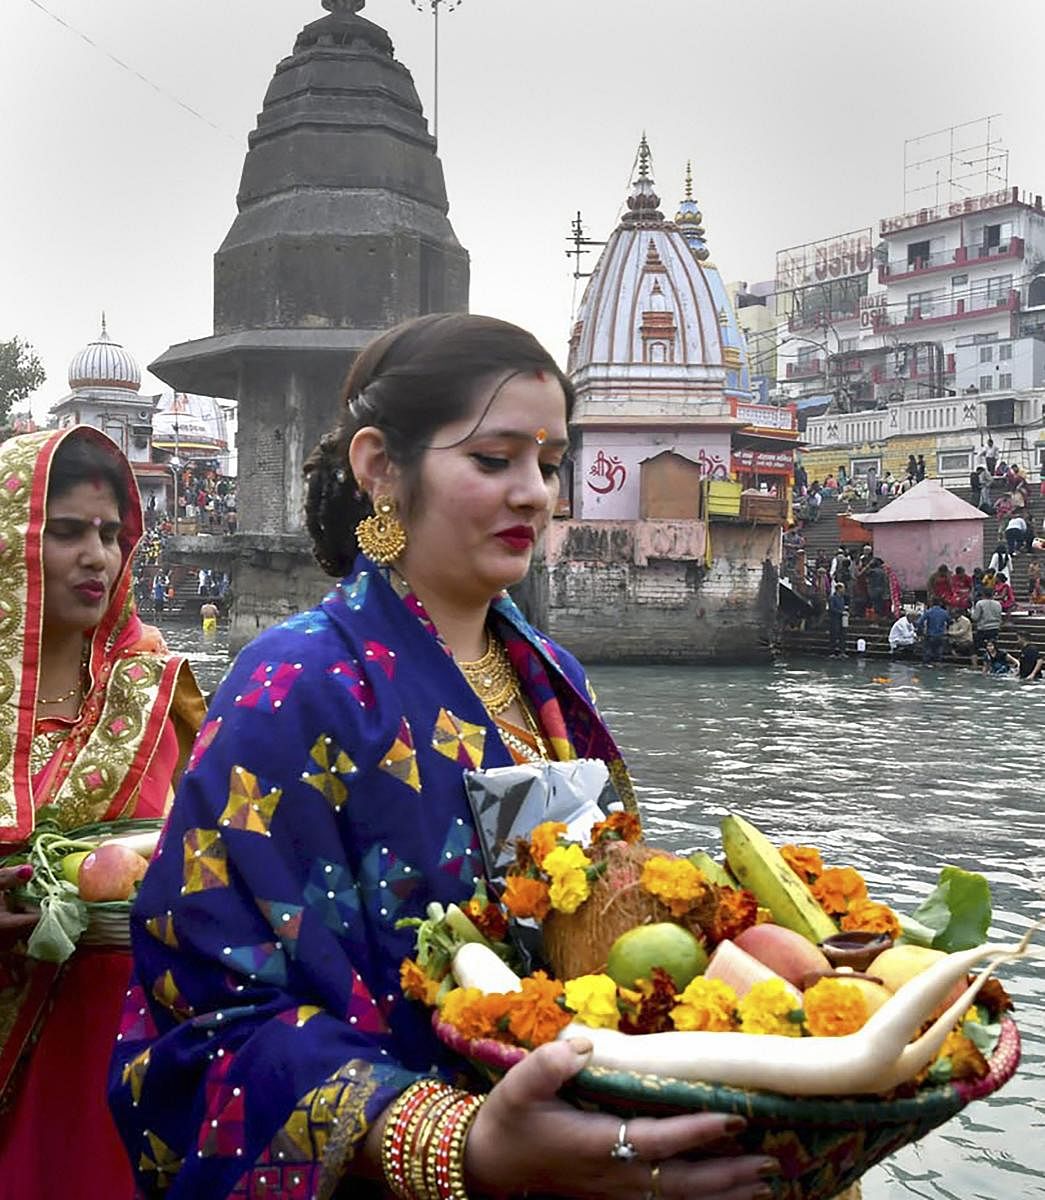 Devotees offer prayers to the Sun god after taking bath in River Ganga on occasion of Chhat puja in Haridwar, Tuesday, Nov 13, 2018. (PTI Photo)